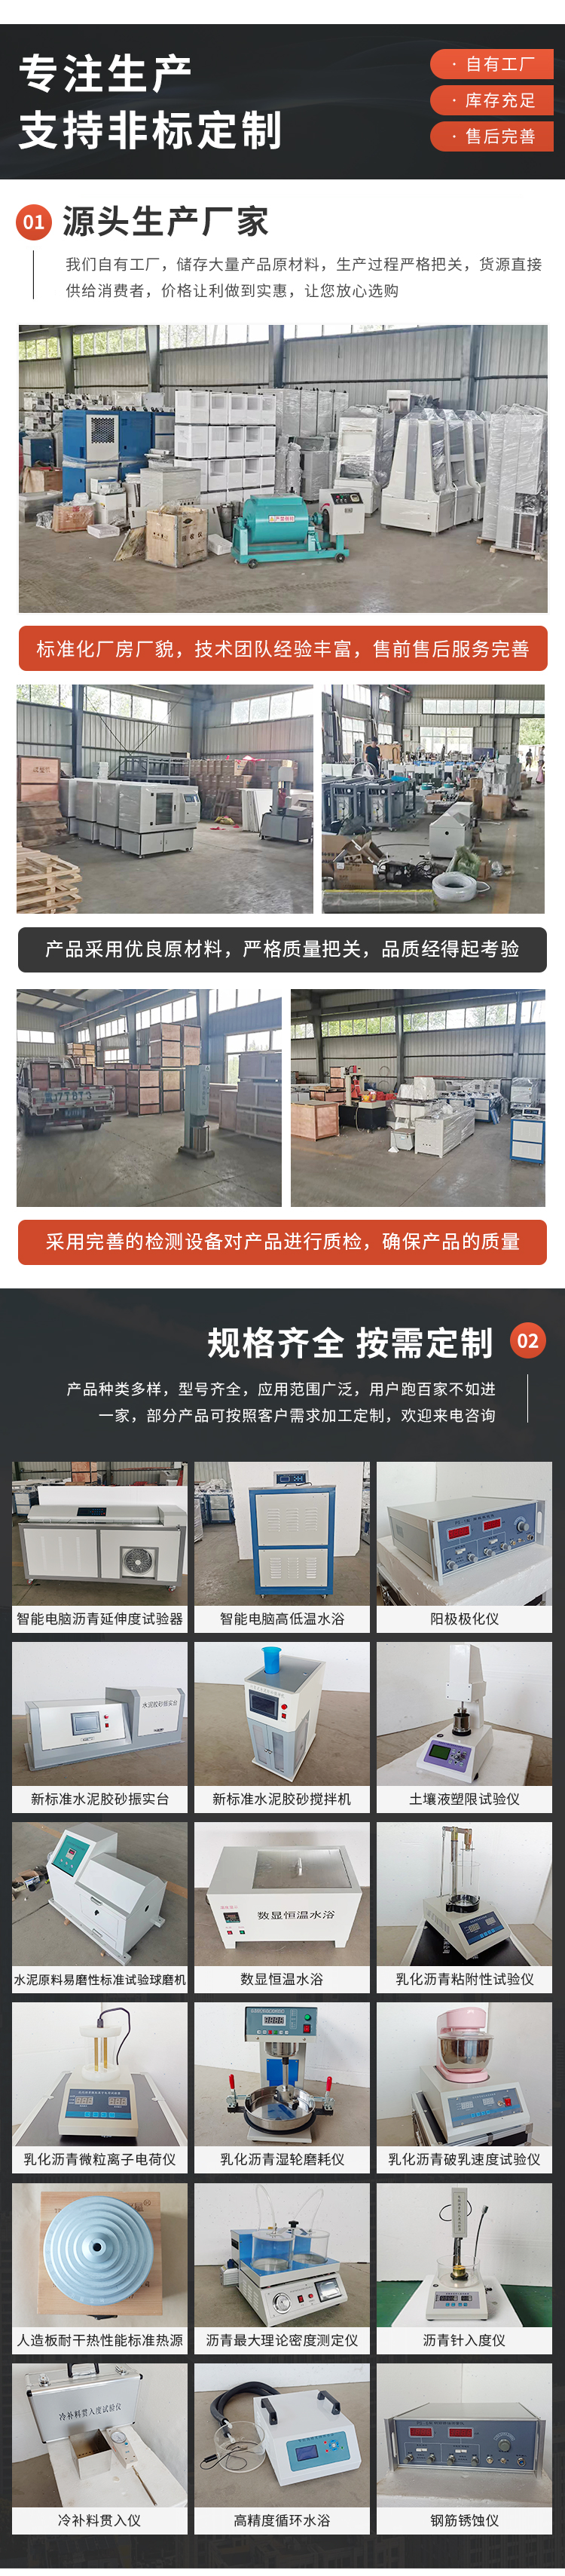 Tianqi Xingzi fully automatic all-in-one machine can perform two test pieces hydration heat test method, nationwide package